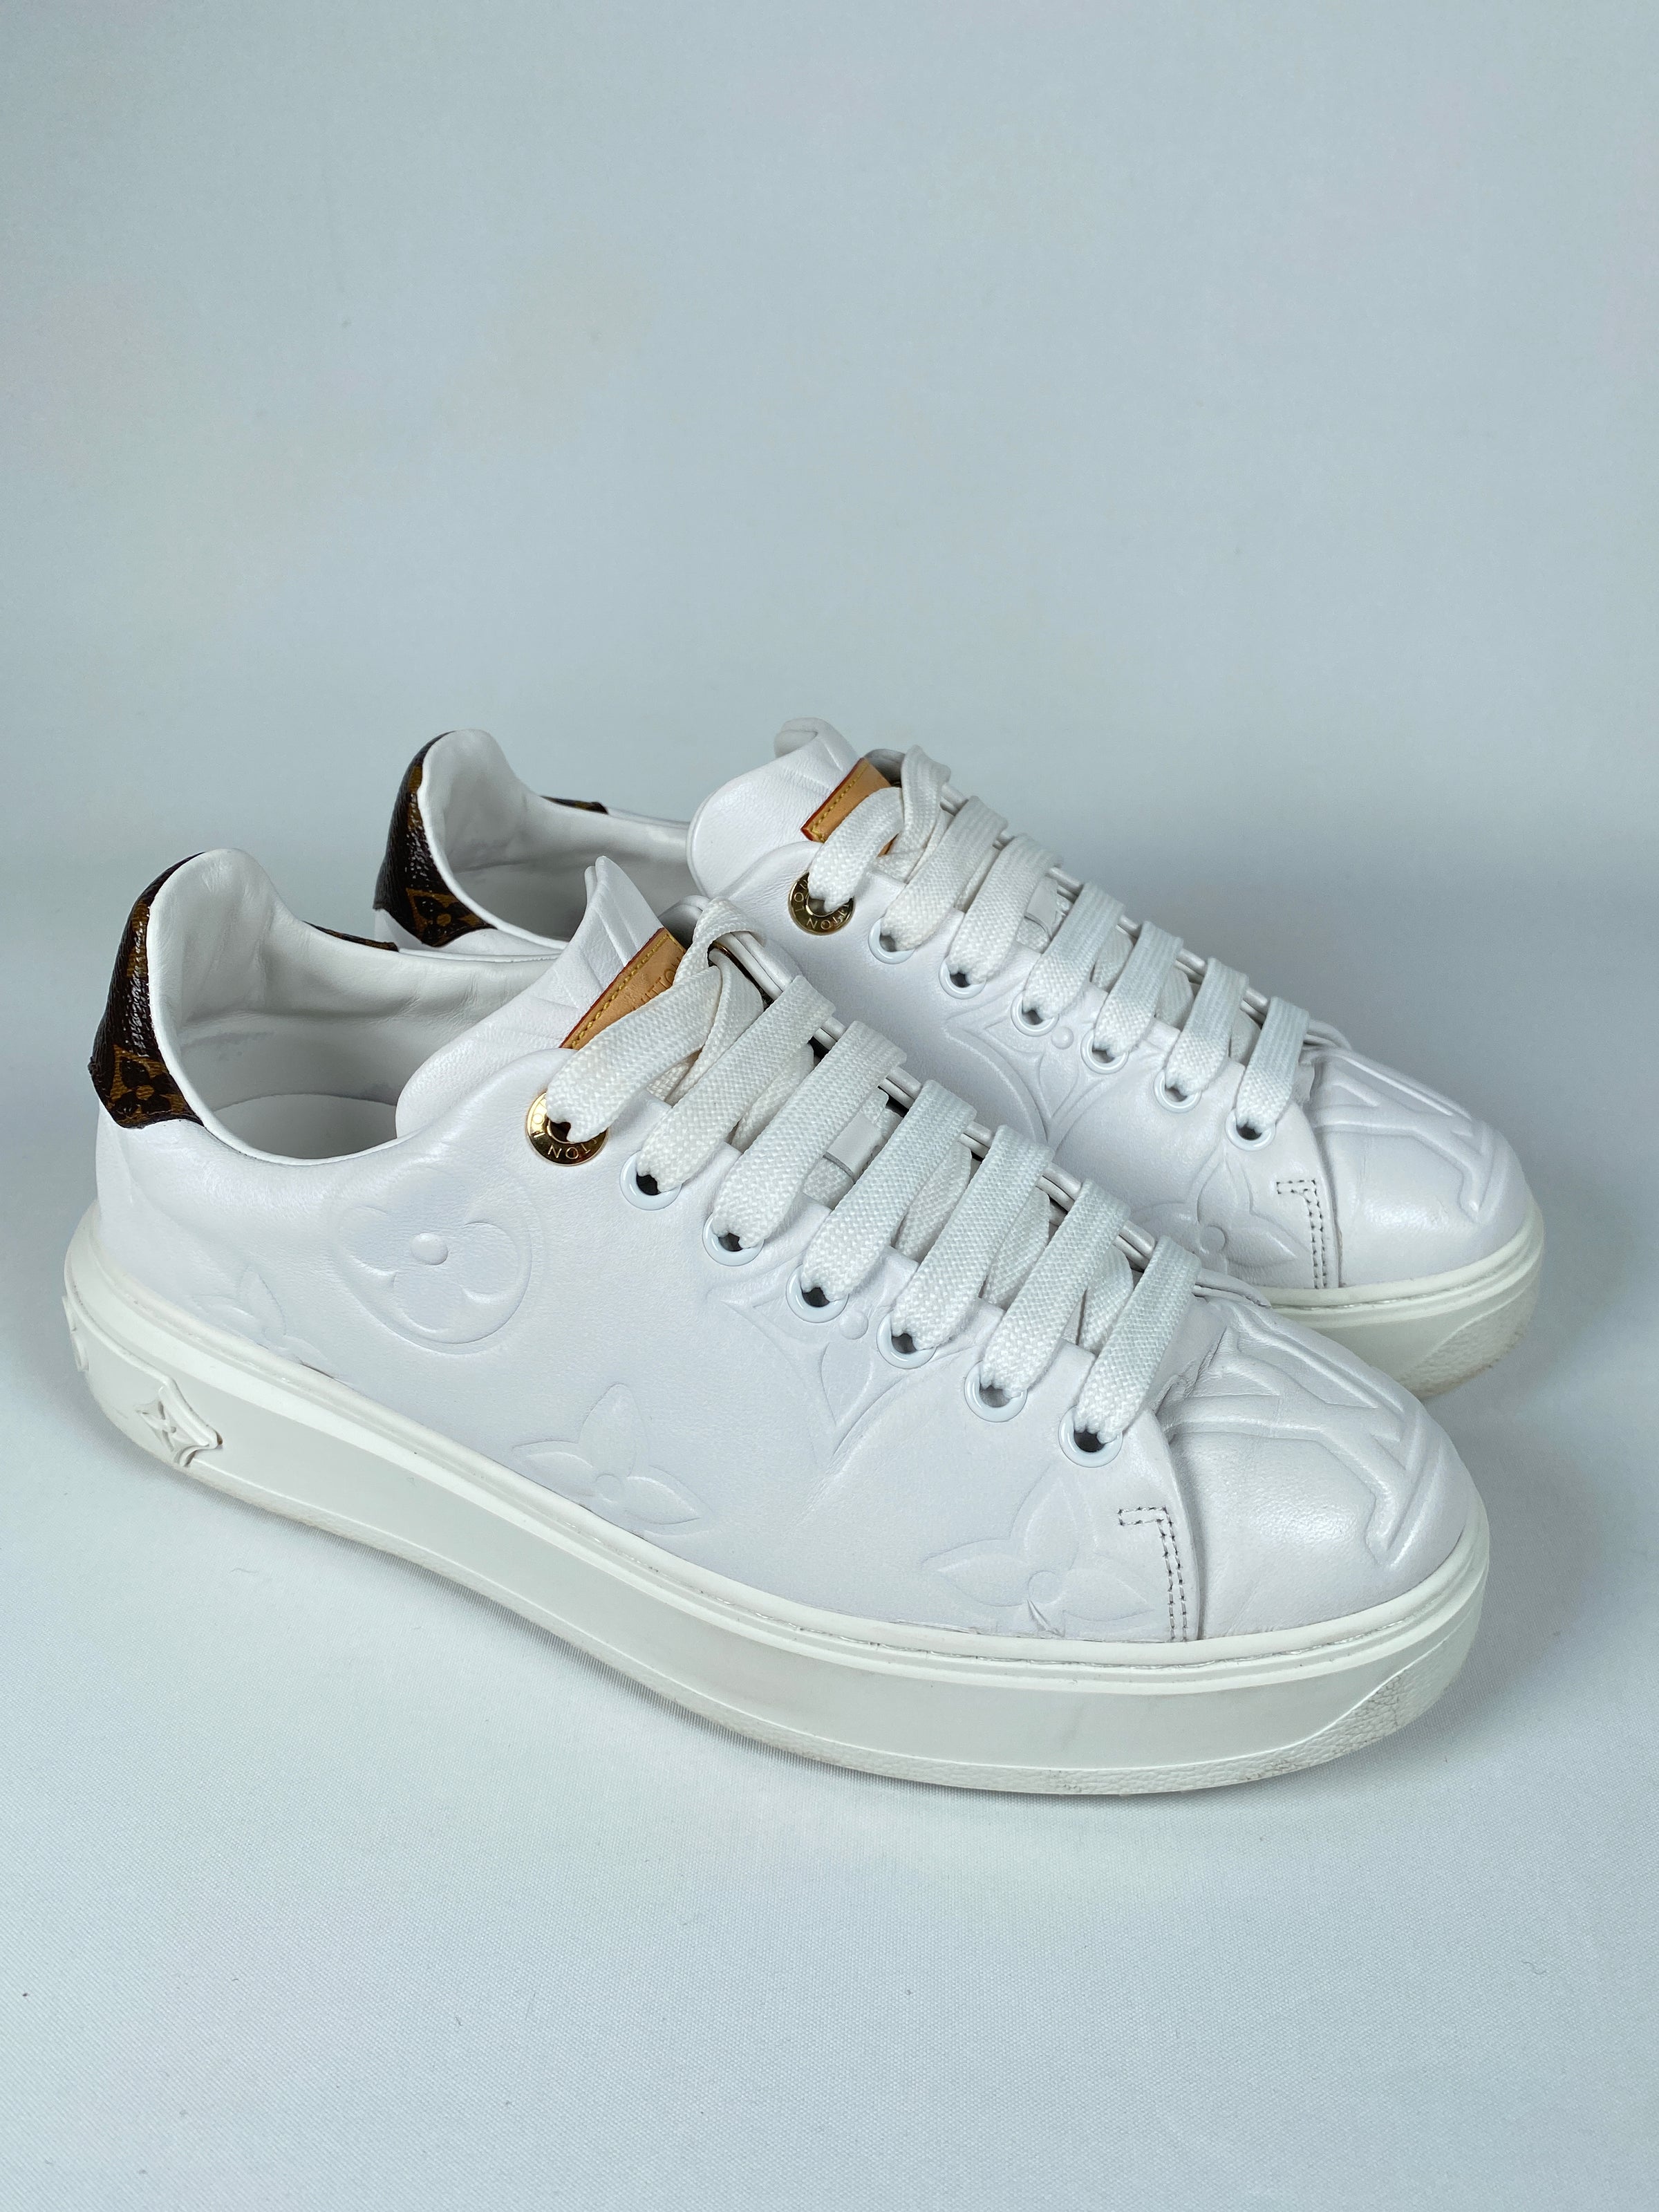 Louis Vuitton Time Out Sneakers Athletic Shoes White Sz 38